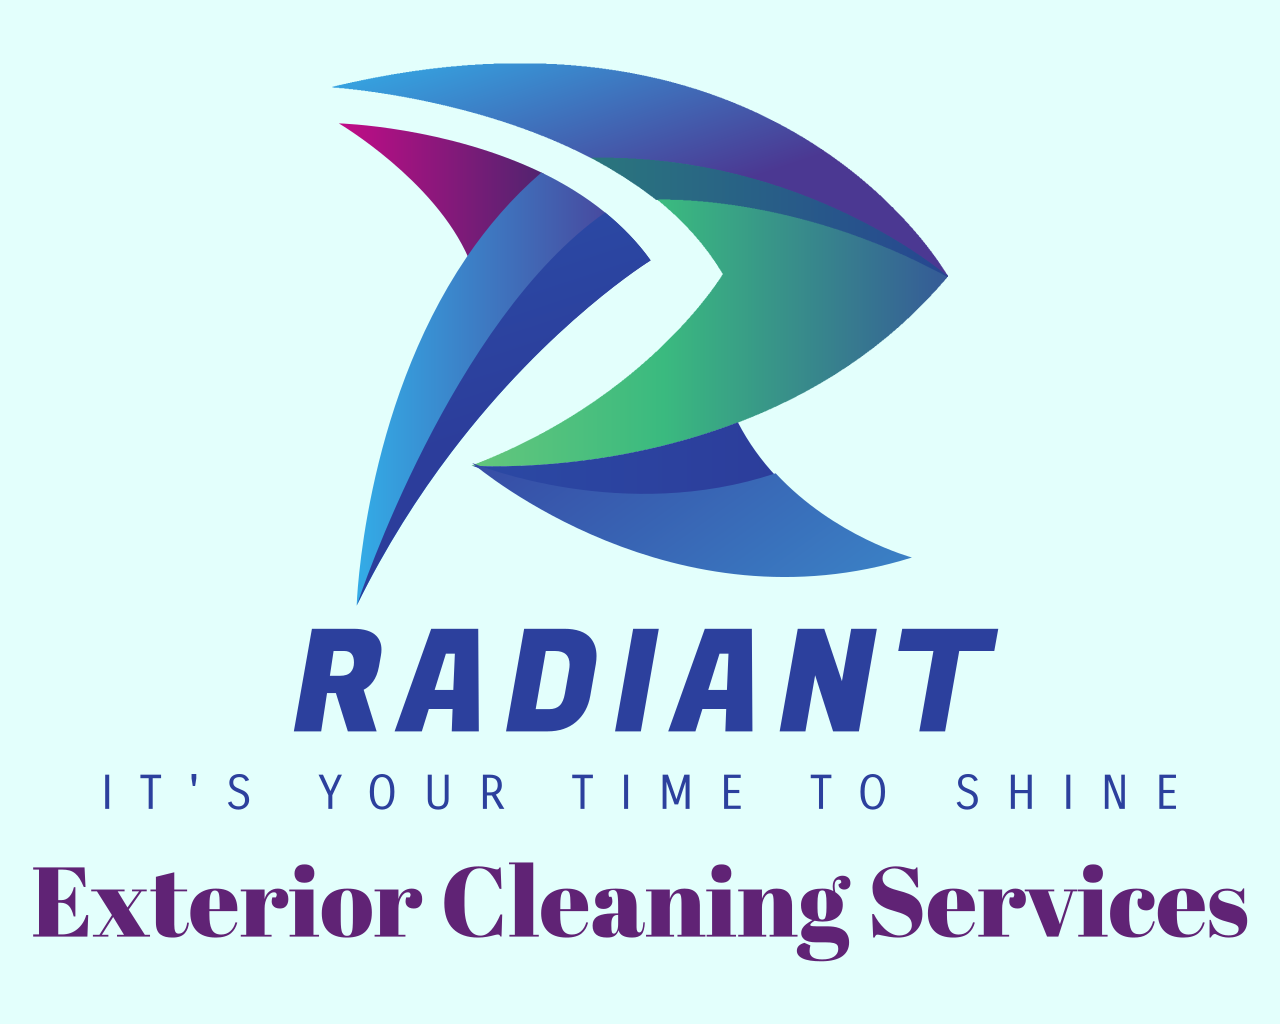 Graphic in Shape of an R and Text Logo of It's Your Time to Shine | Harvest, AL | Radiant Exterior Cleaning